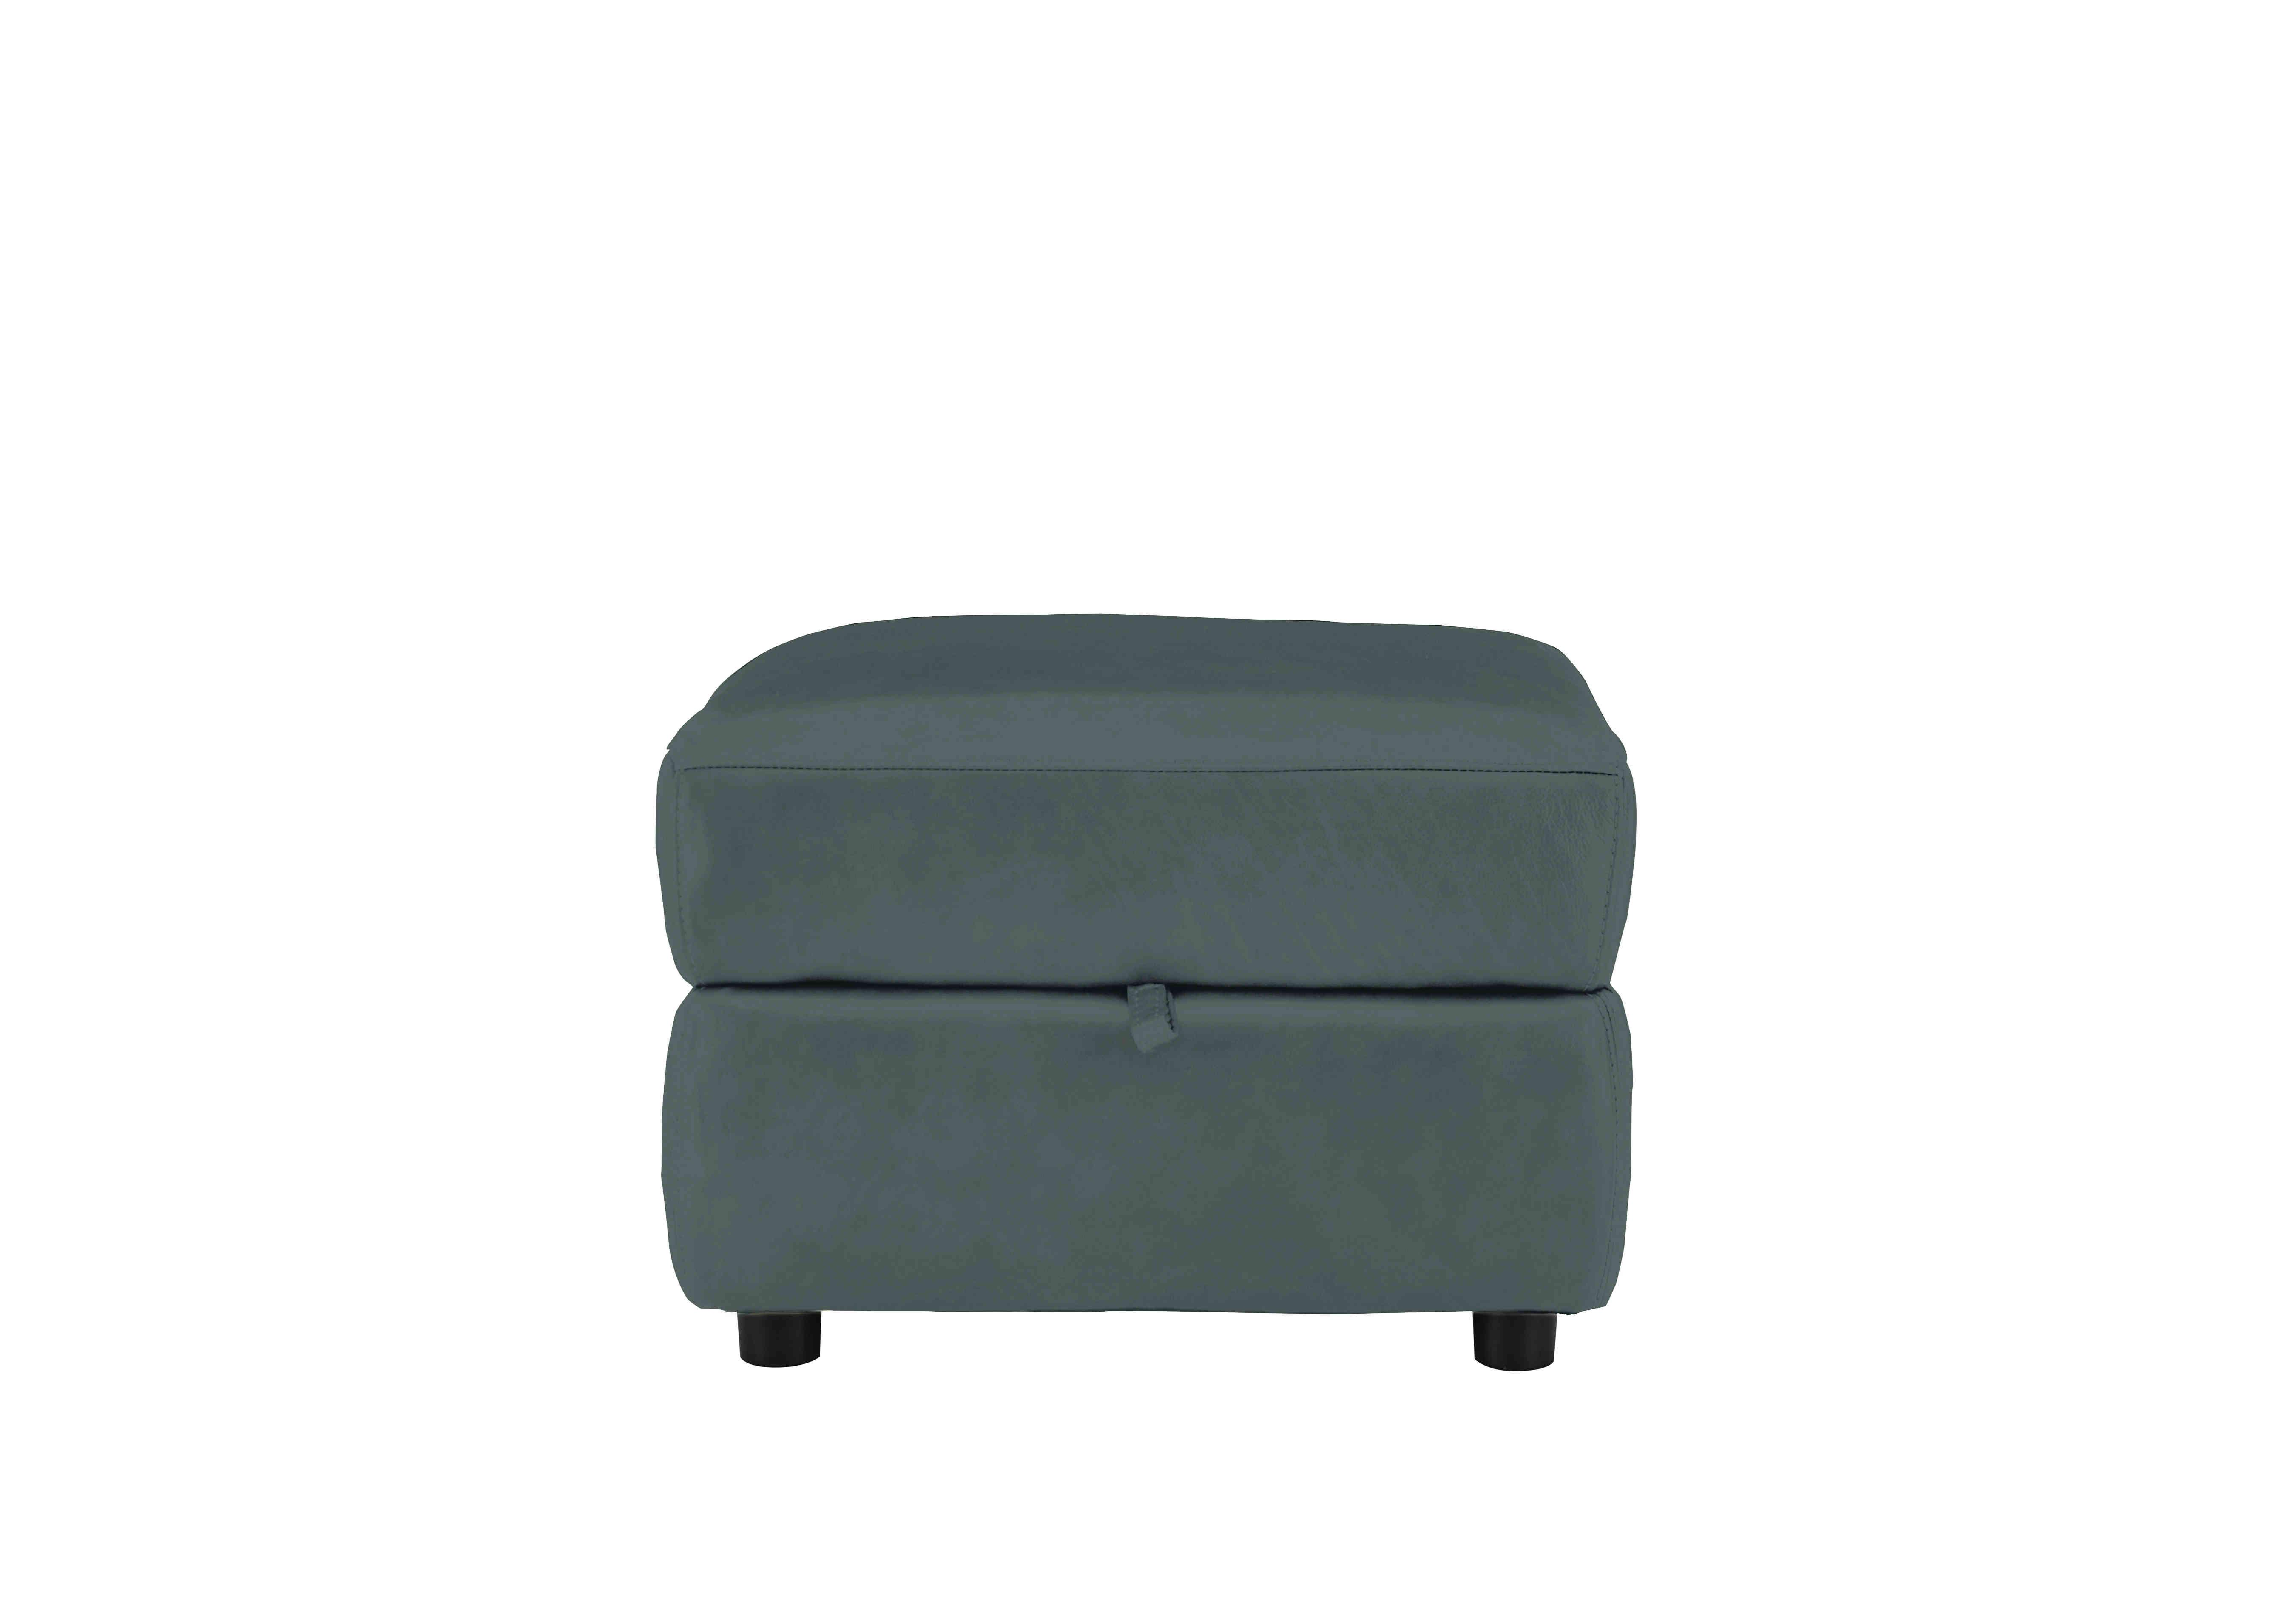 Relax Station Revive Leather Storage Footstool in Bv-301e Lake Green on Furniture Village